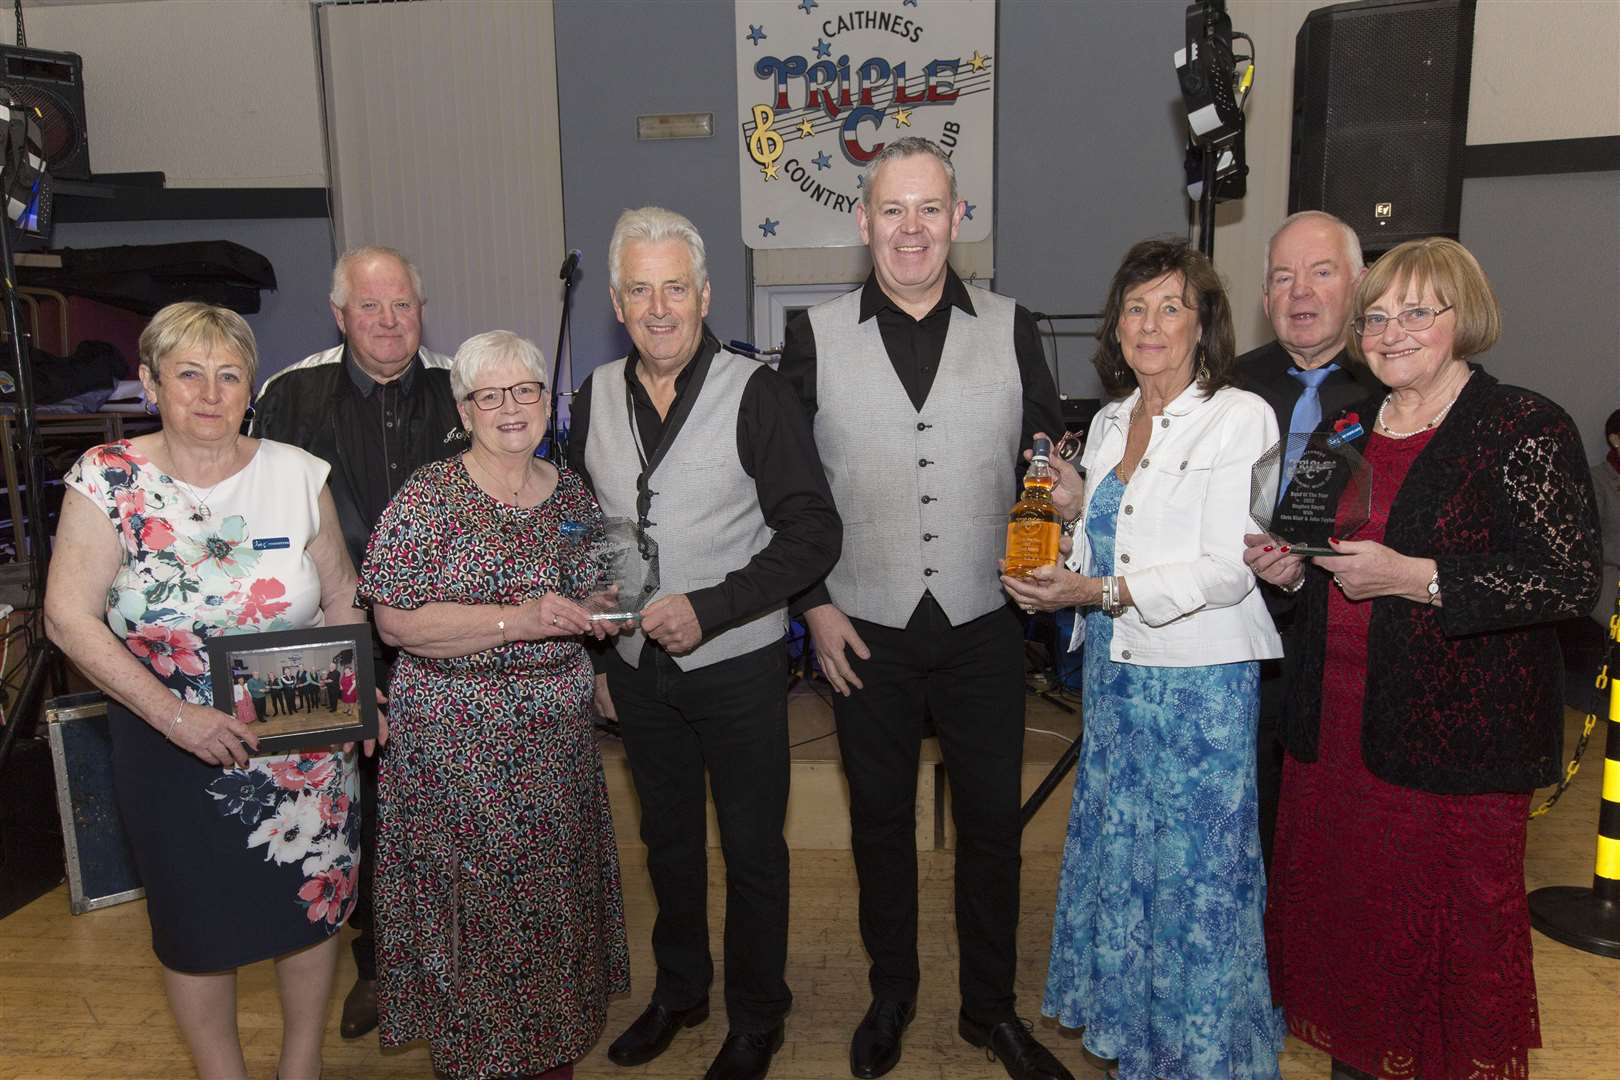 The award is presented to the band at an event in Wick. Picture: Robert MacDonald/Northern Studios